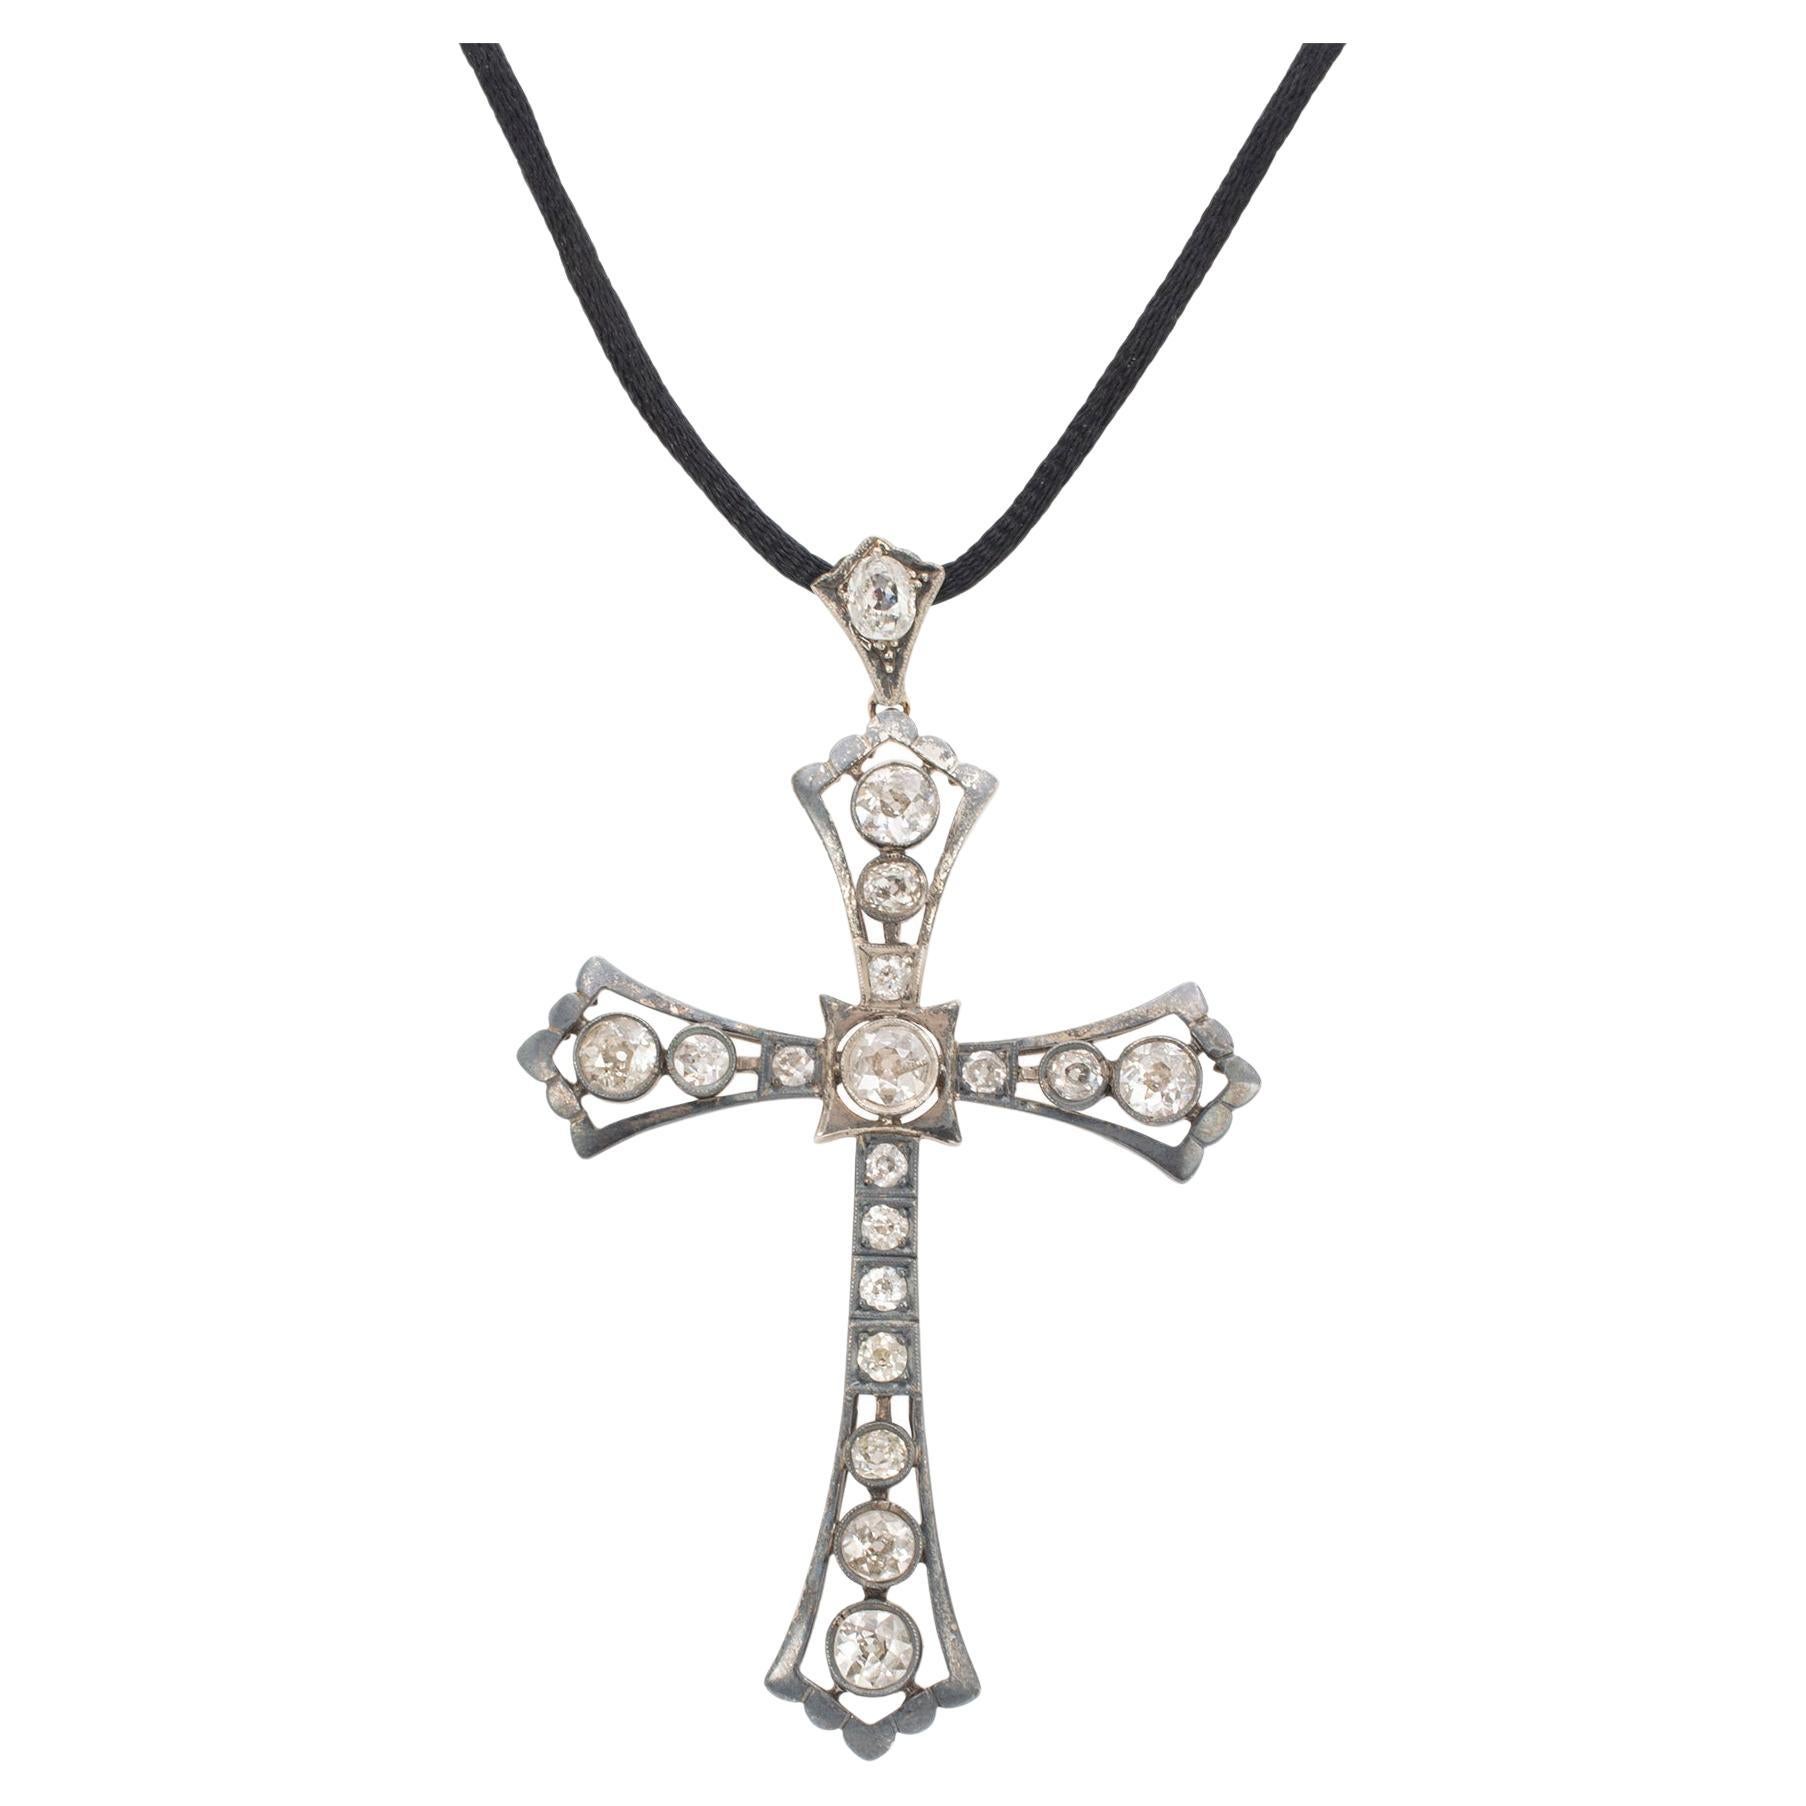 Ladies Victorian Antique Sterling Silver Old Cuts Diamond Cross Pendant Necklace